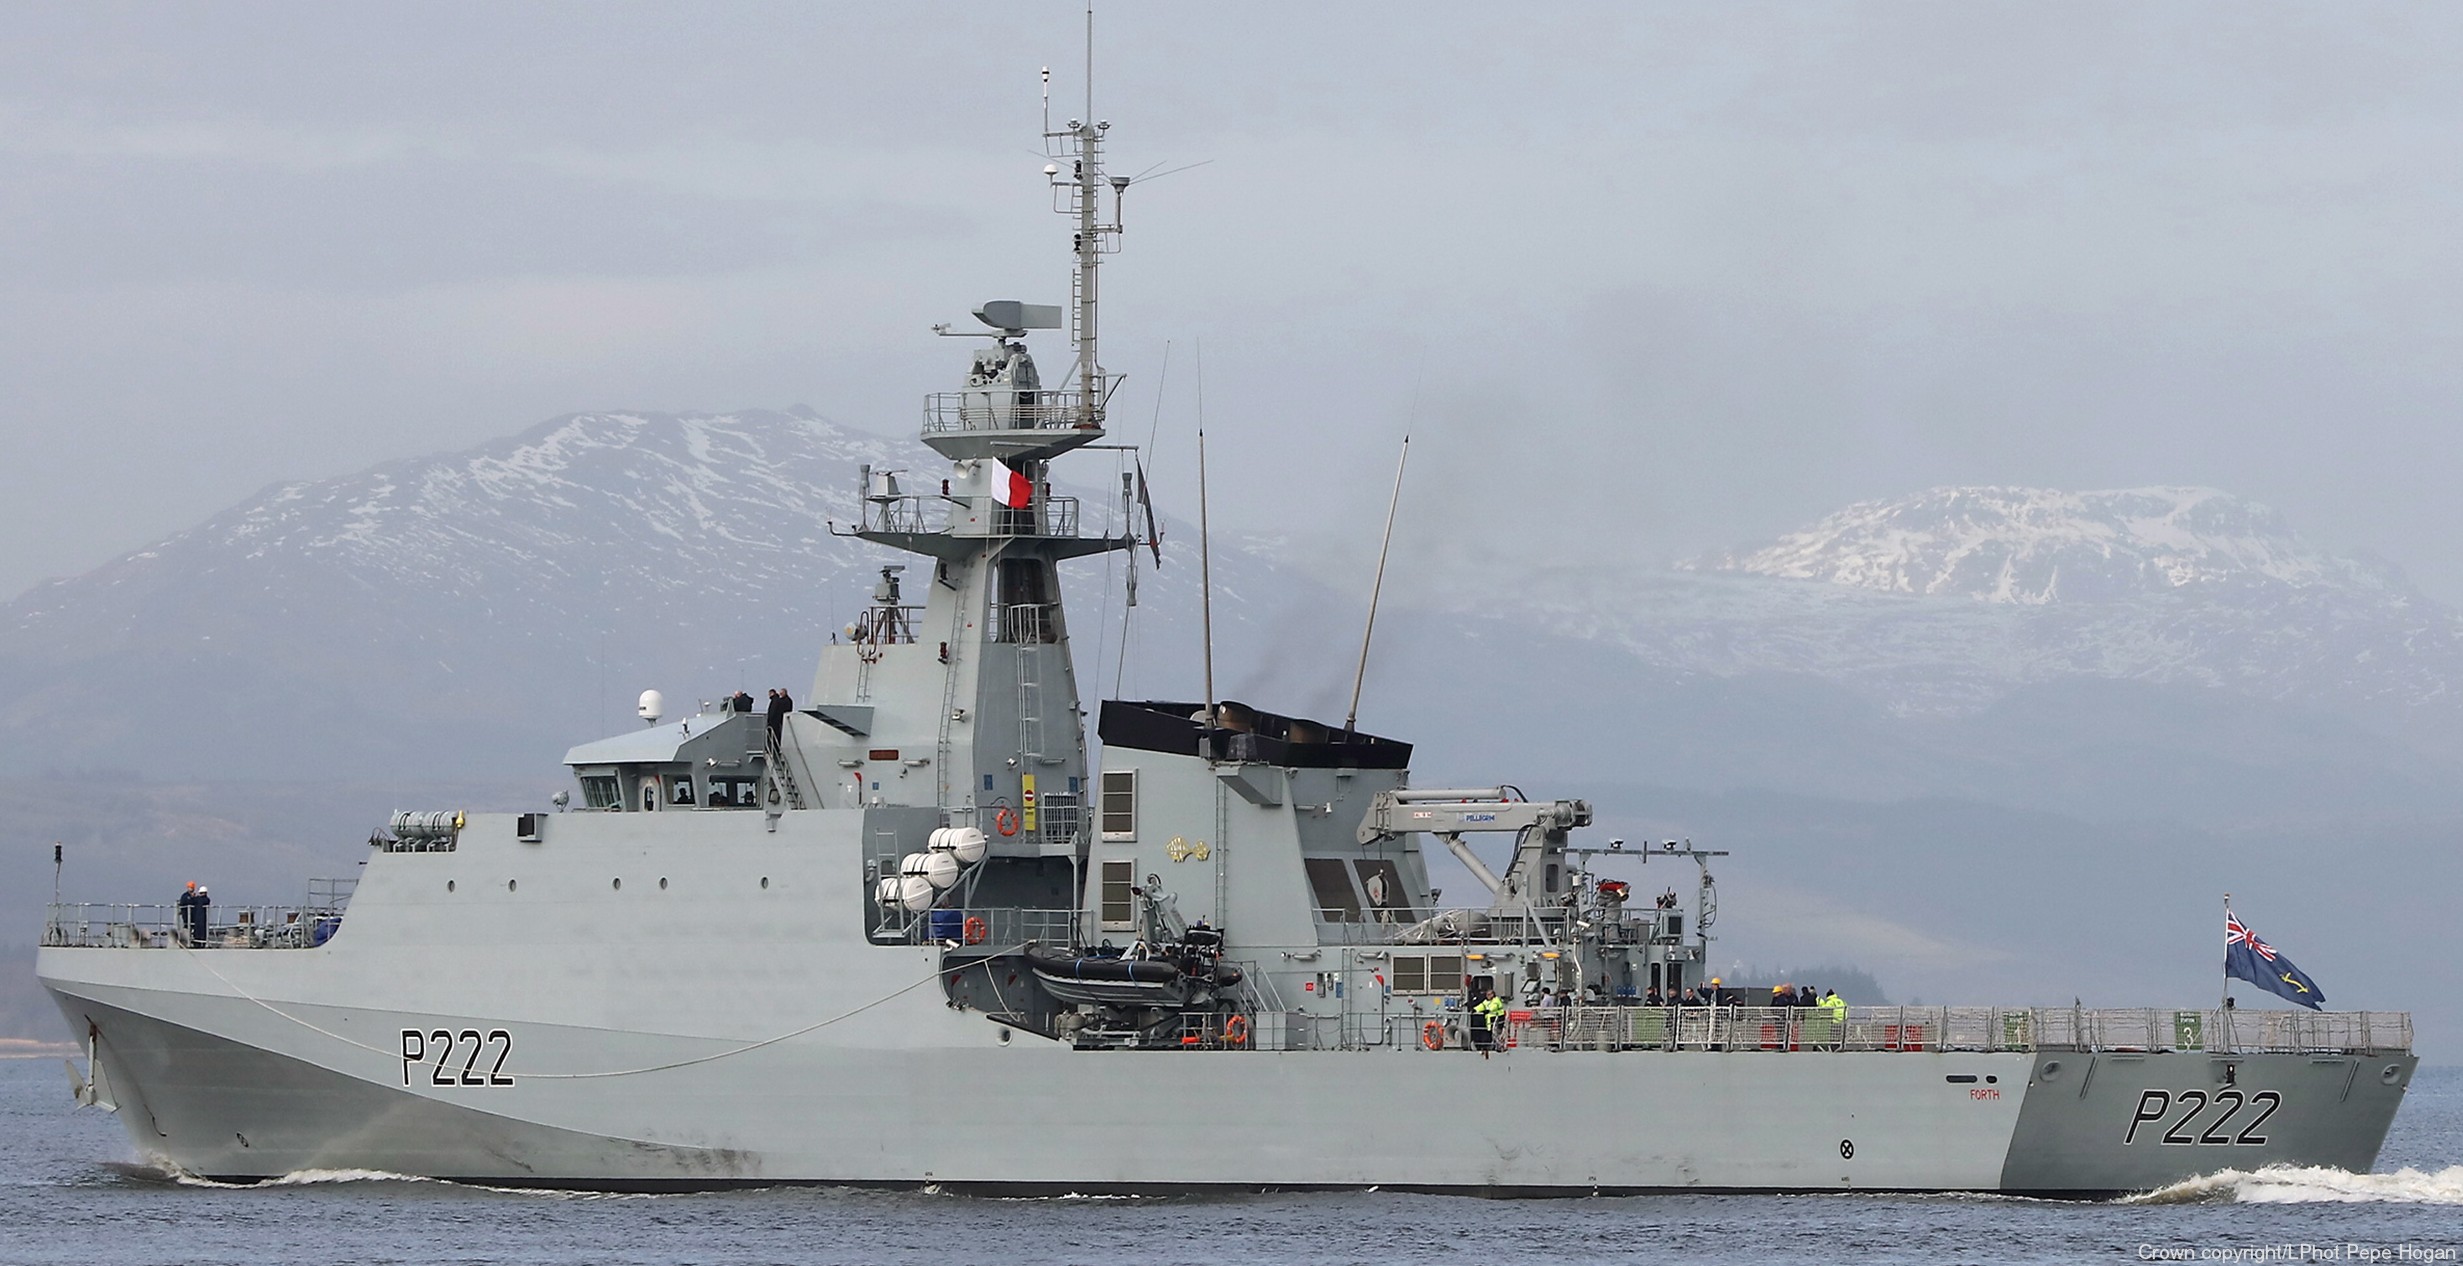 p-222 hms forth river class offshore patrol vessel opv royal navy 09